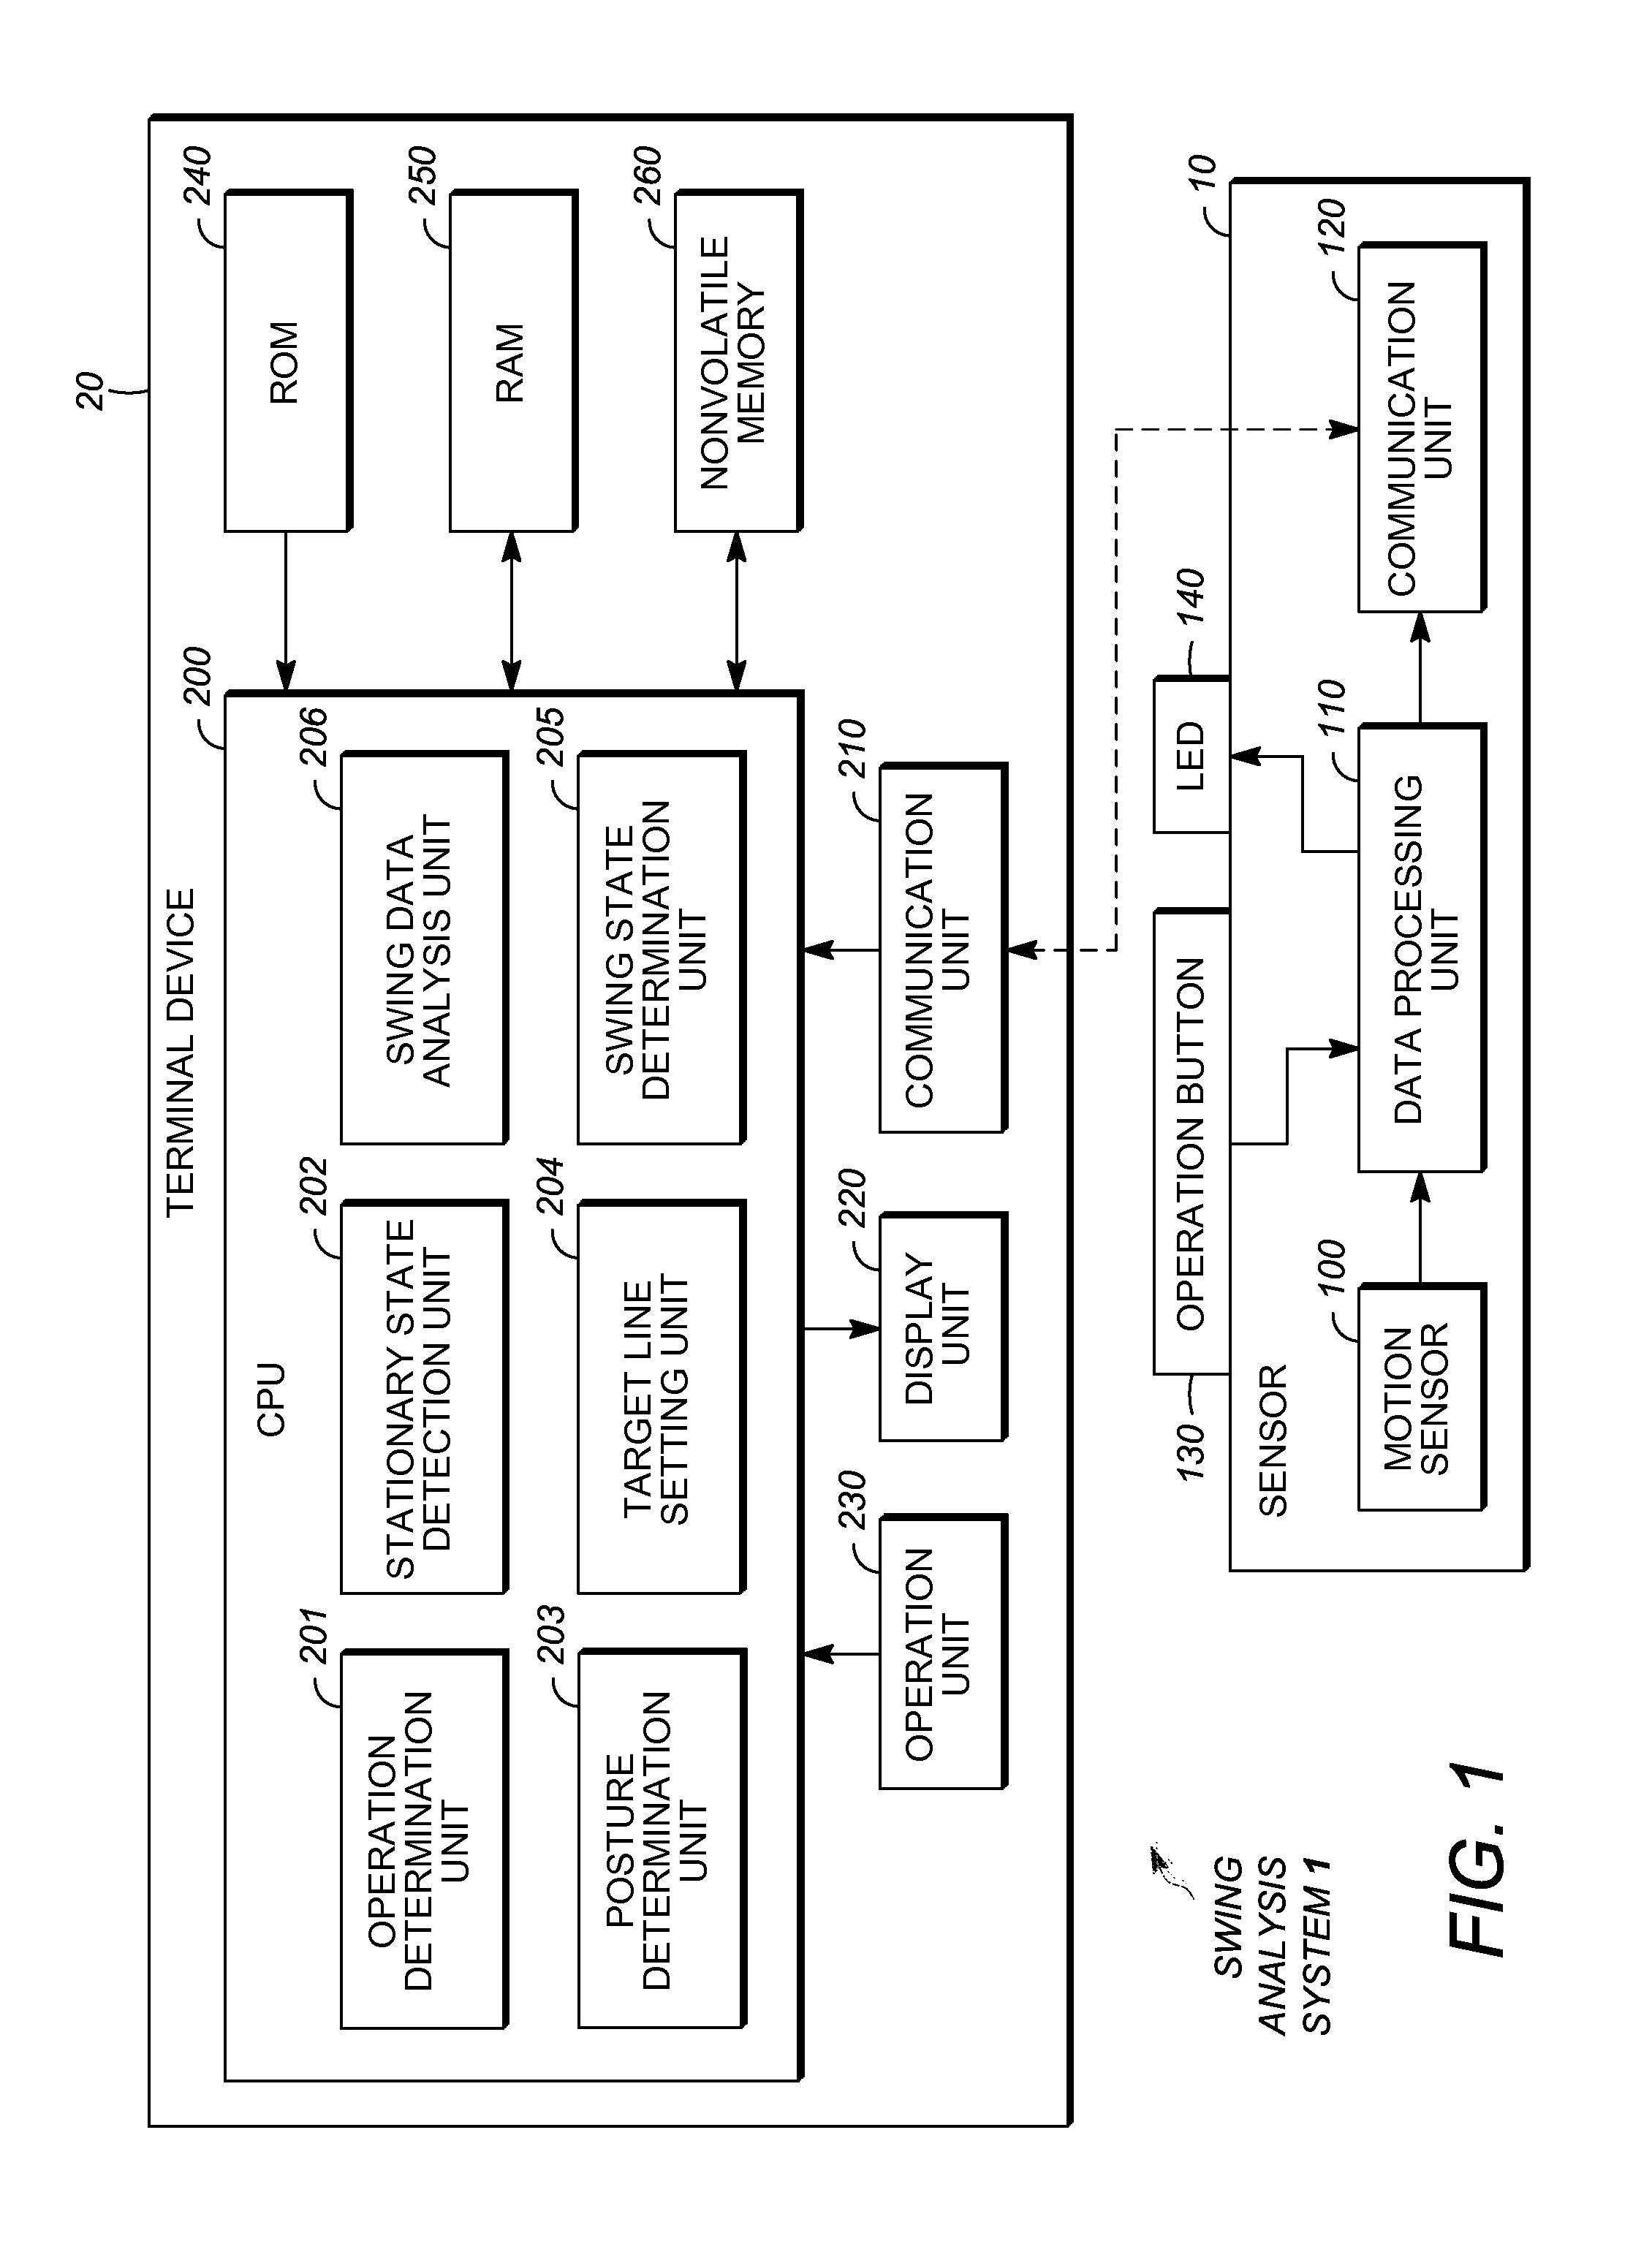 System and method for swing analyses